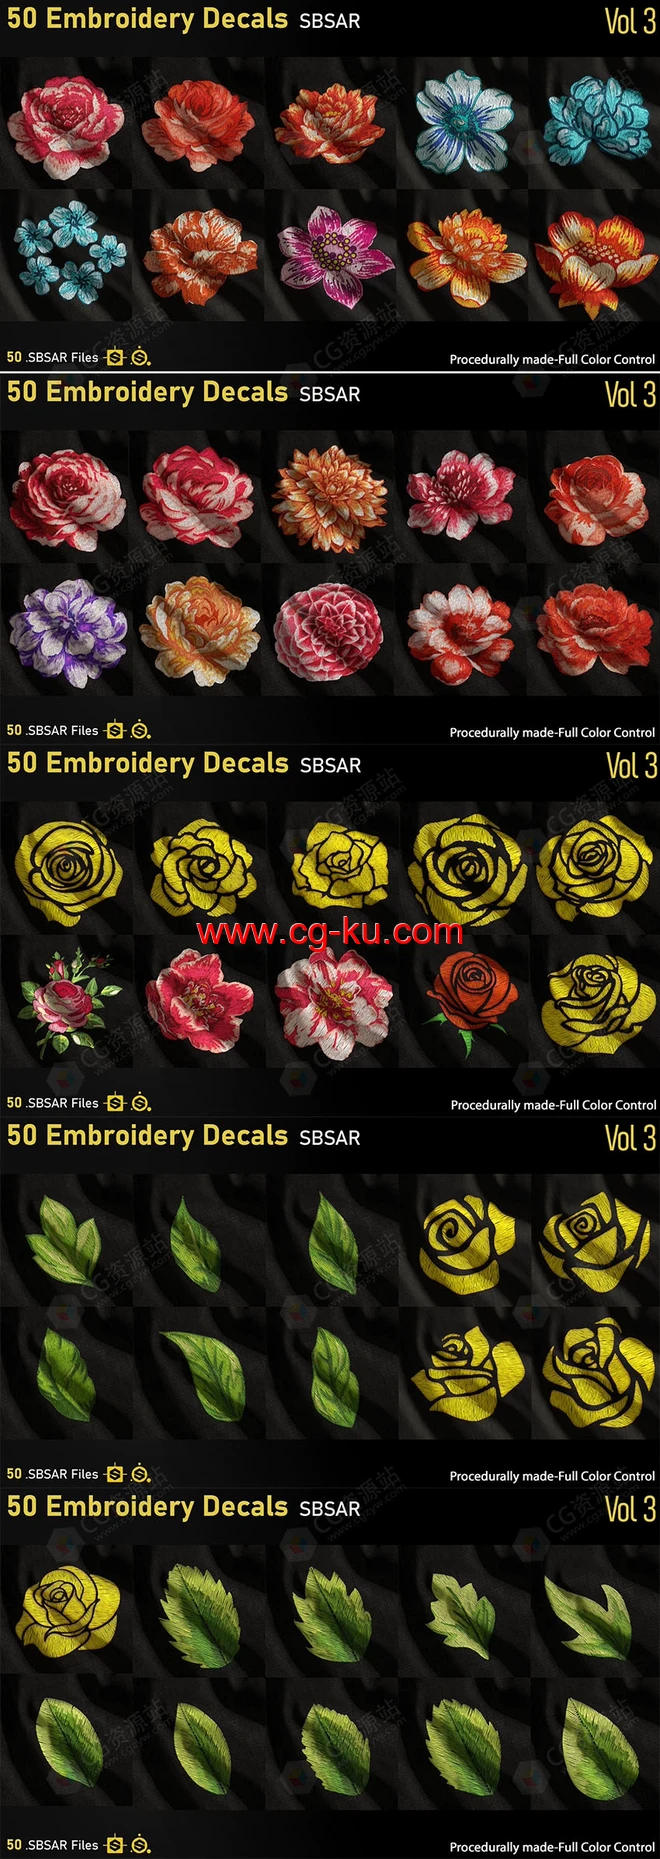 Substance 50种刺绣贴花-SBSAR格式 50-Embroidery Decals-SBSAR-Vol3的图片2